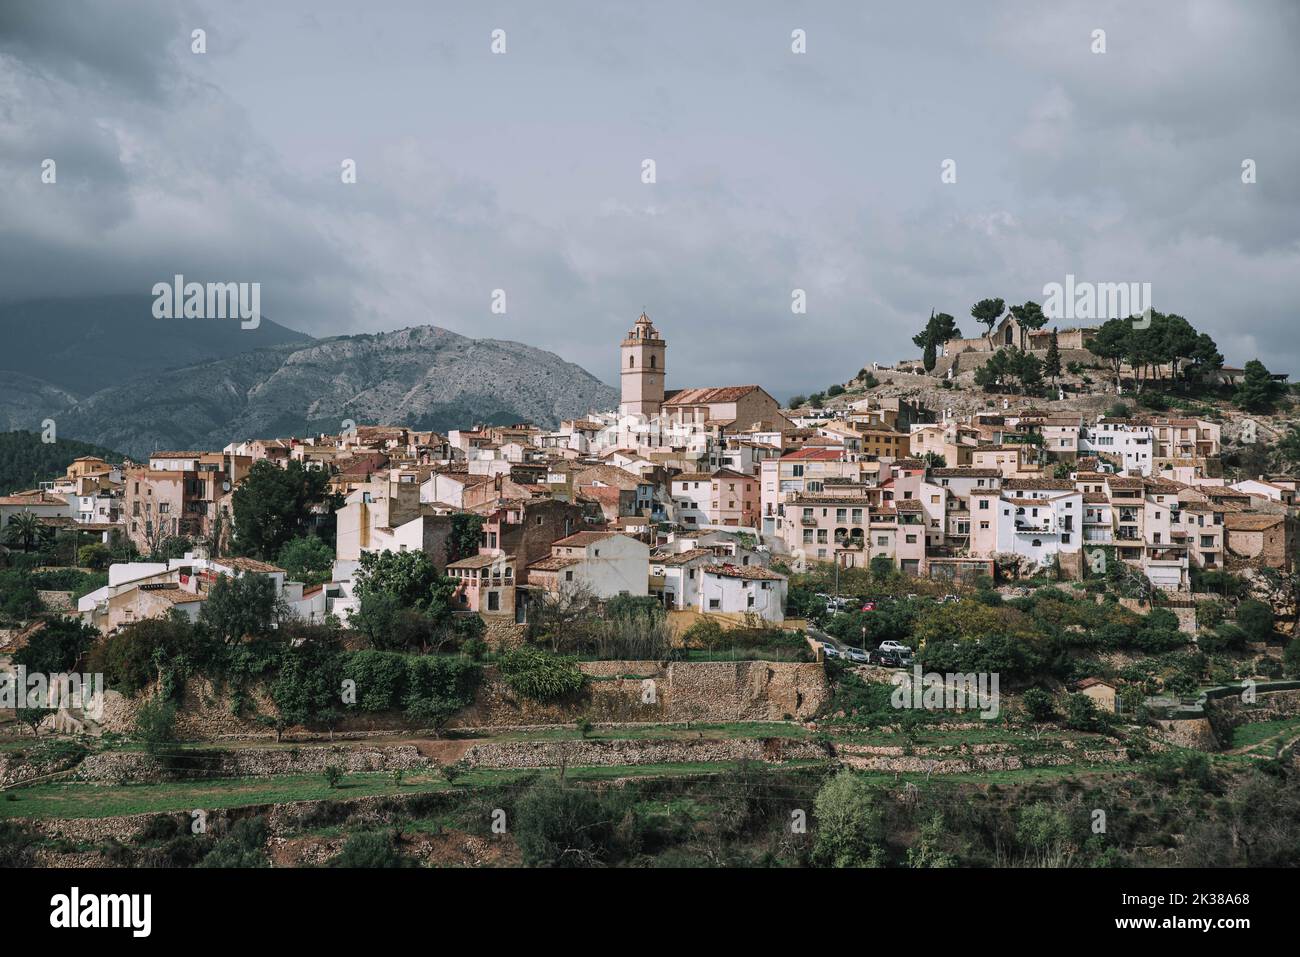 A cityscape of La Nucia in Valencian Community, Spain with mountains in the background Stock Photo